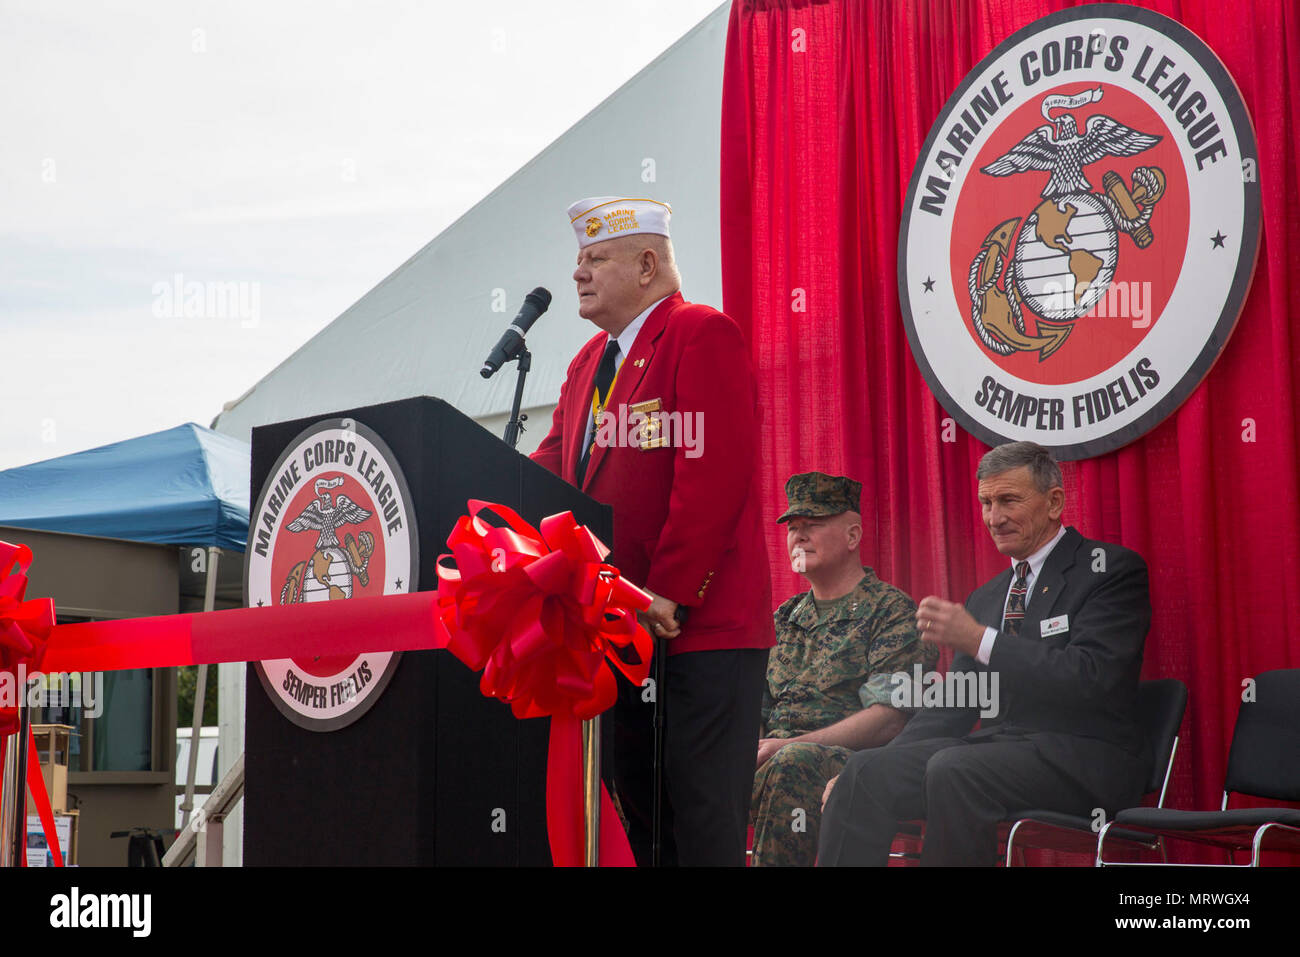 Richard D. Gore Sr., Commandant, Marine Corps League, speaks at the opening ceremony for the Marine South Military Exposition, Goettege Field House, Camp Lejeune N.C., April 13, 2017. The Marine South Exposition is sponsored by the Marine Corps League and is a forum for defense contractors to display, inform, and promote the latest in defense equipment and technology. Stock Photo